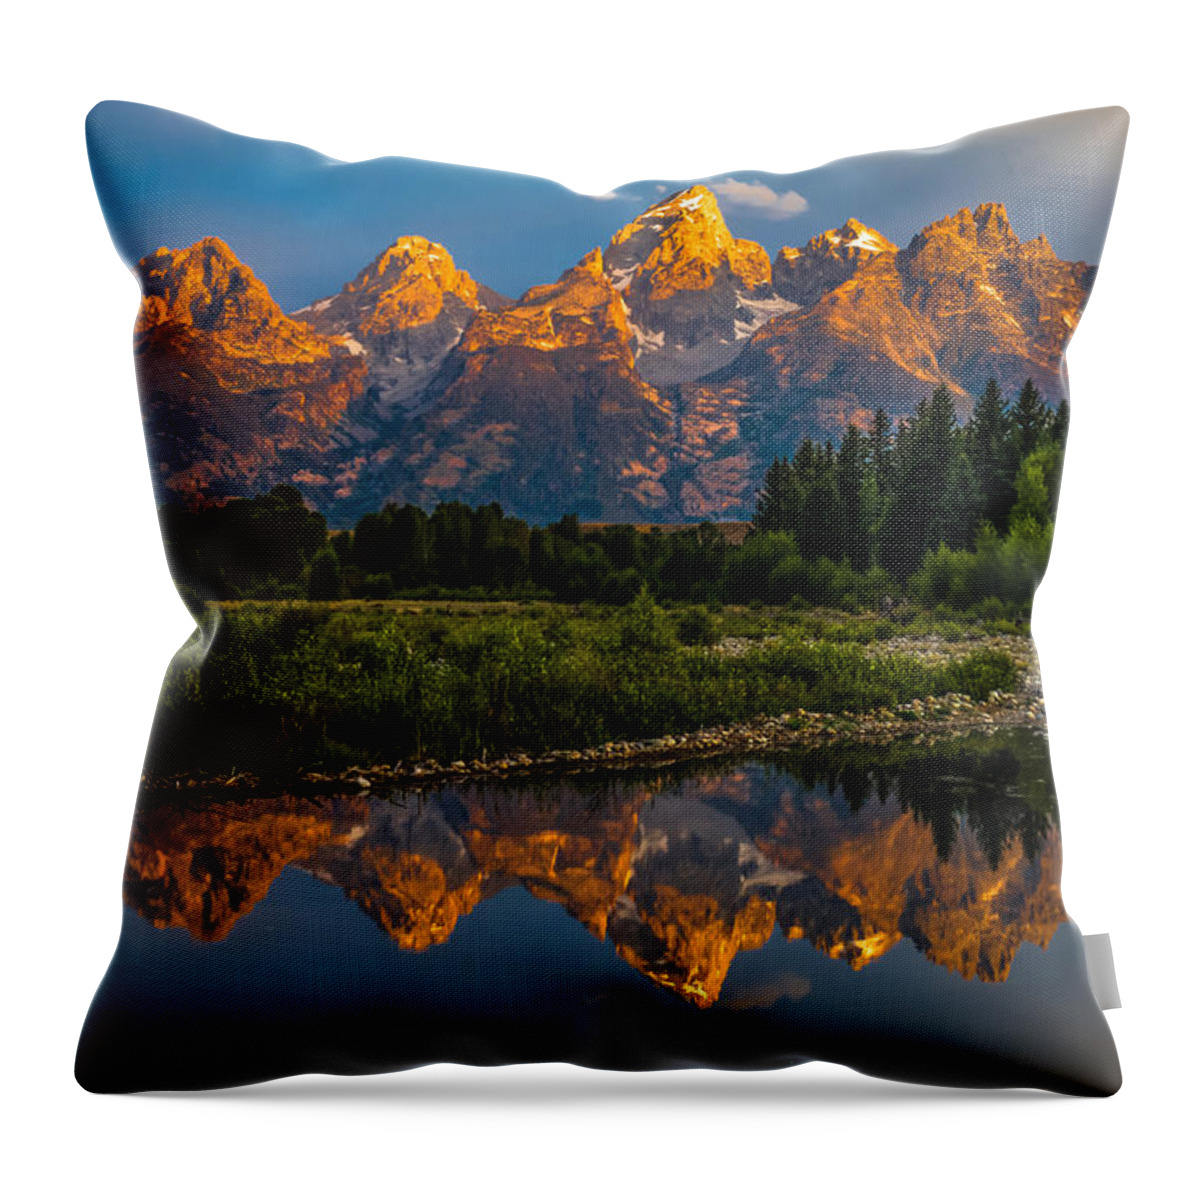 Canyon Throw Pillow featuring the photograph Dramatic Grand Teton Sunrise by Serge Skiba